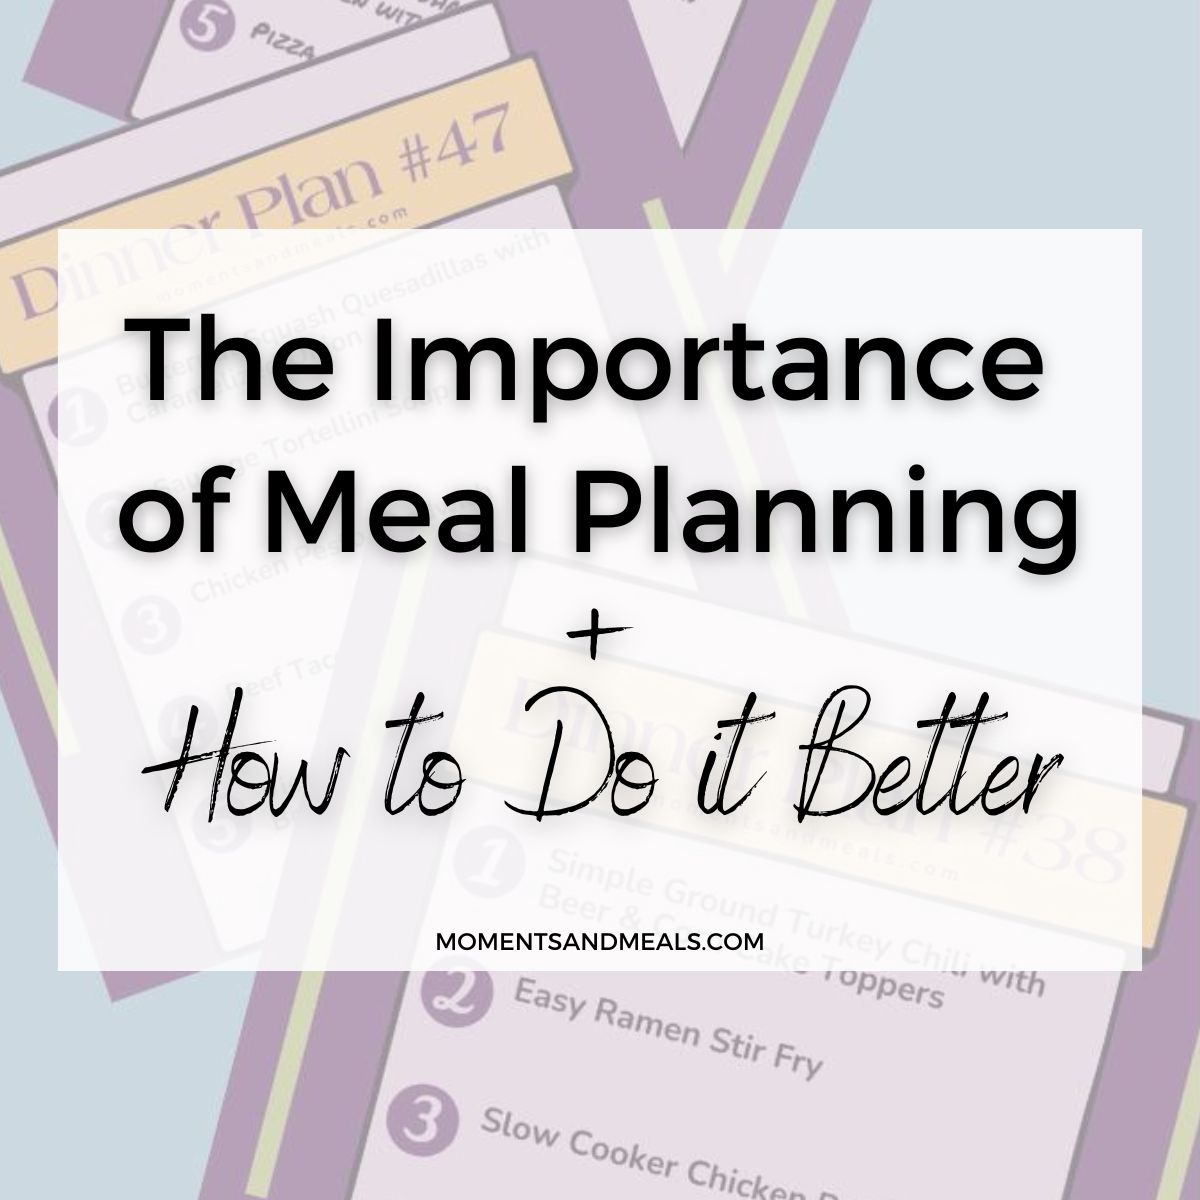 The Importance of Meal Planning + How to Do it Better